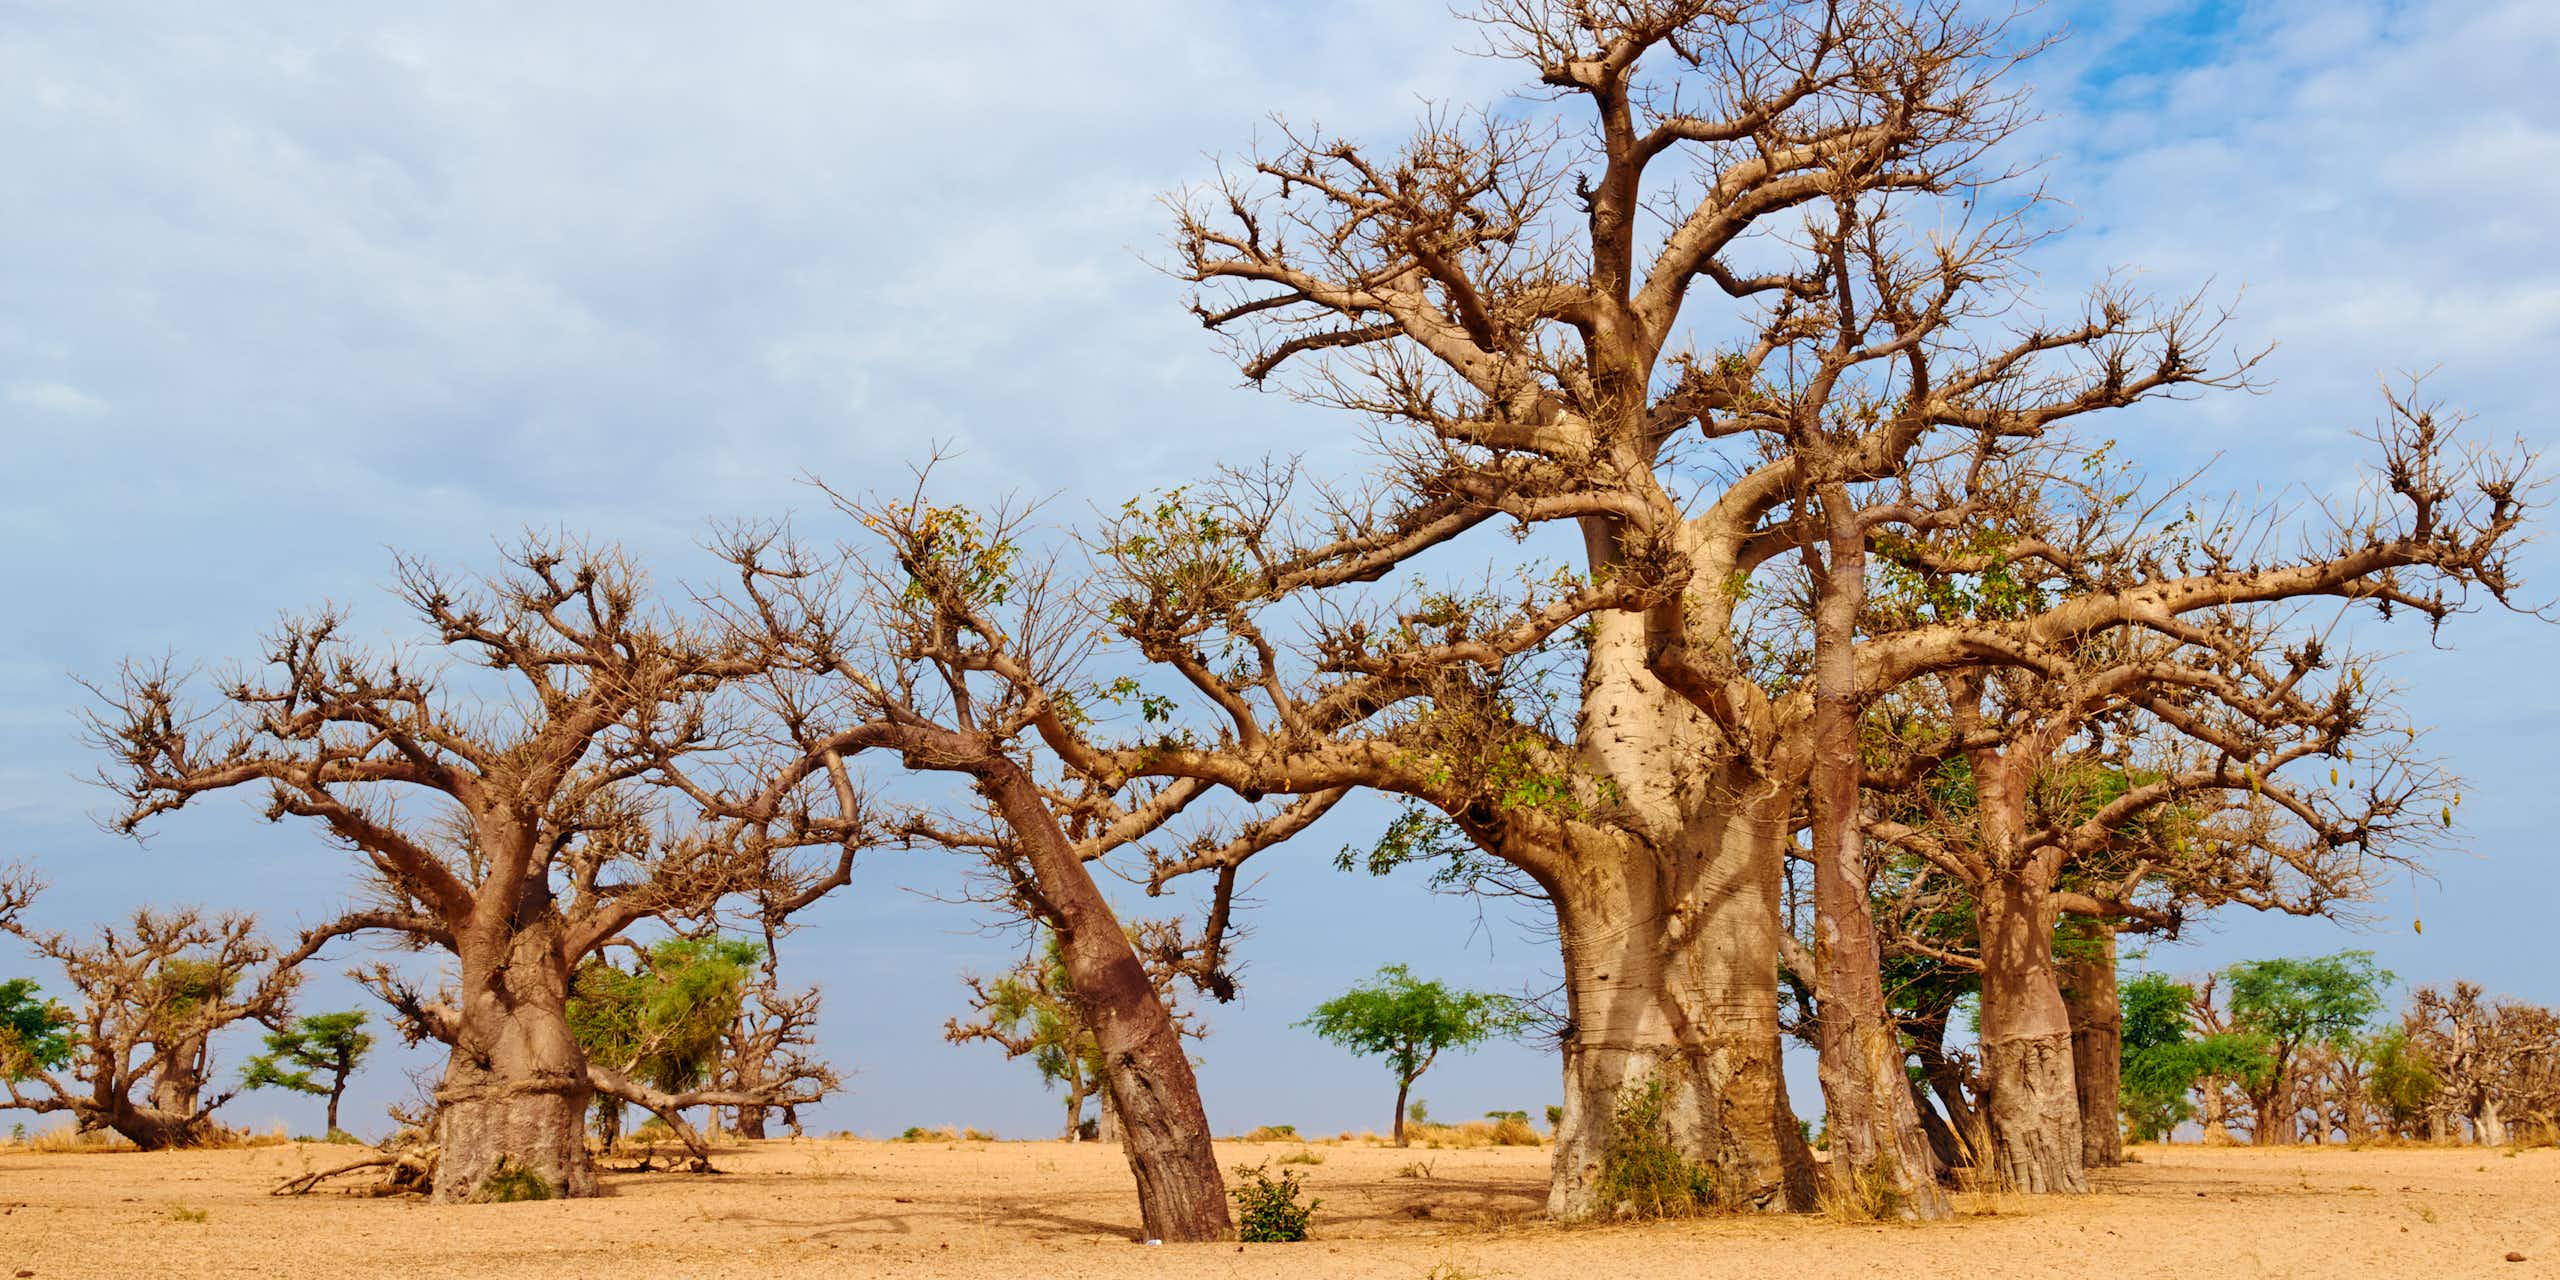 About eight gnarled baobabs standing in a dry and dusty landscape